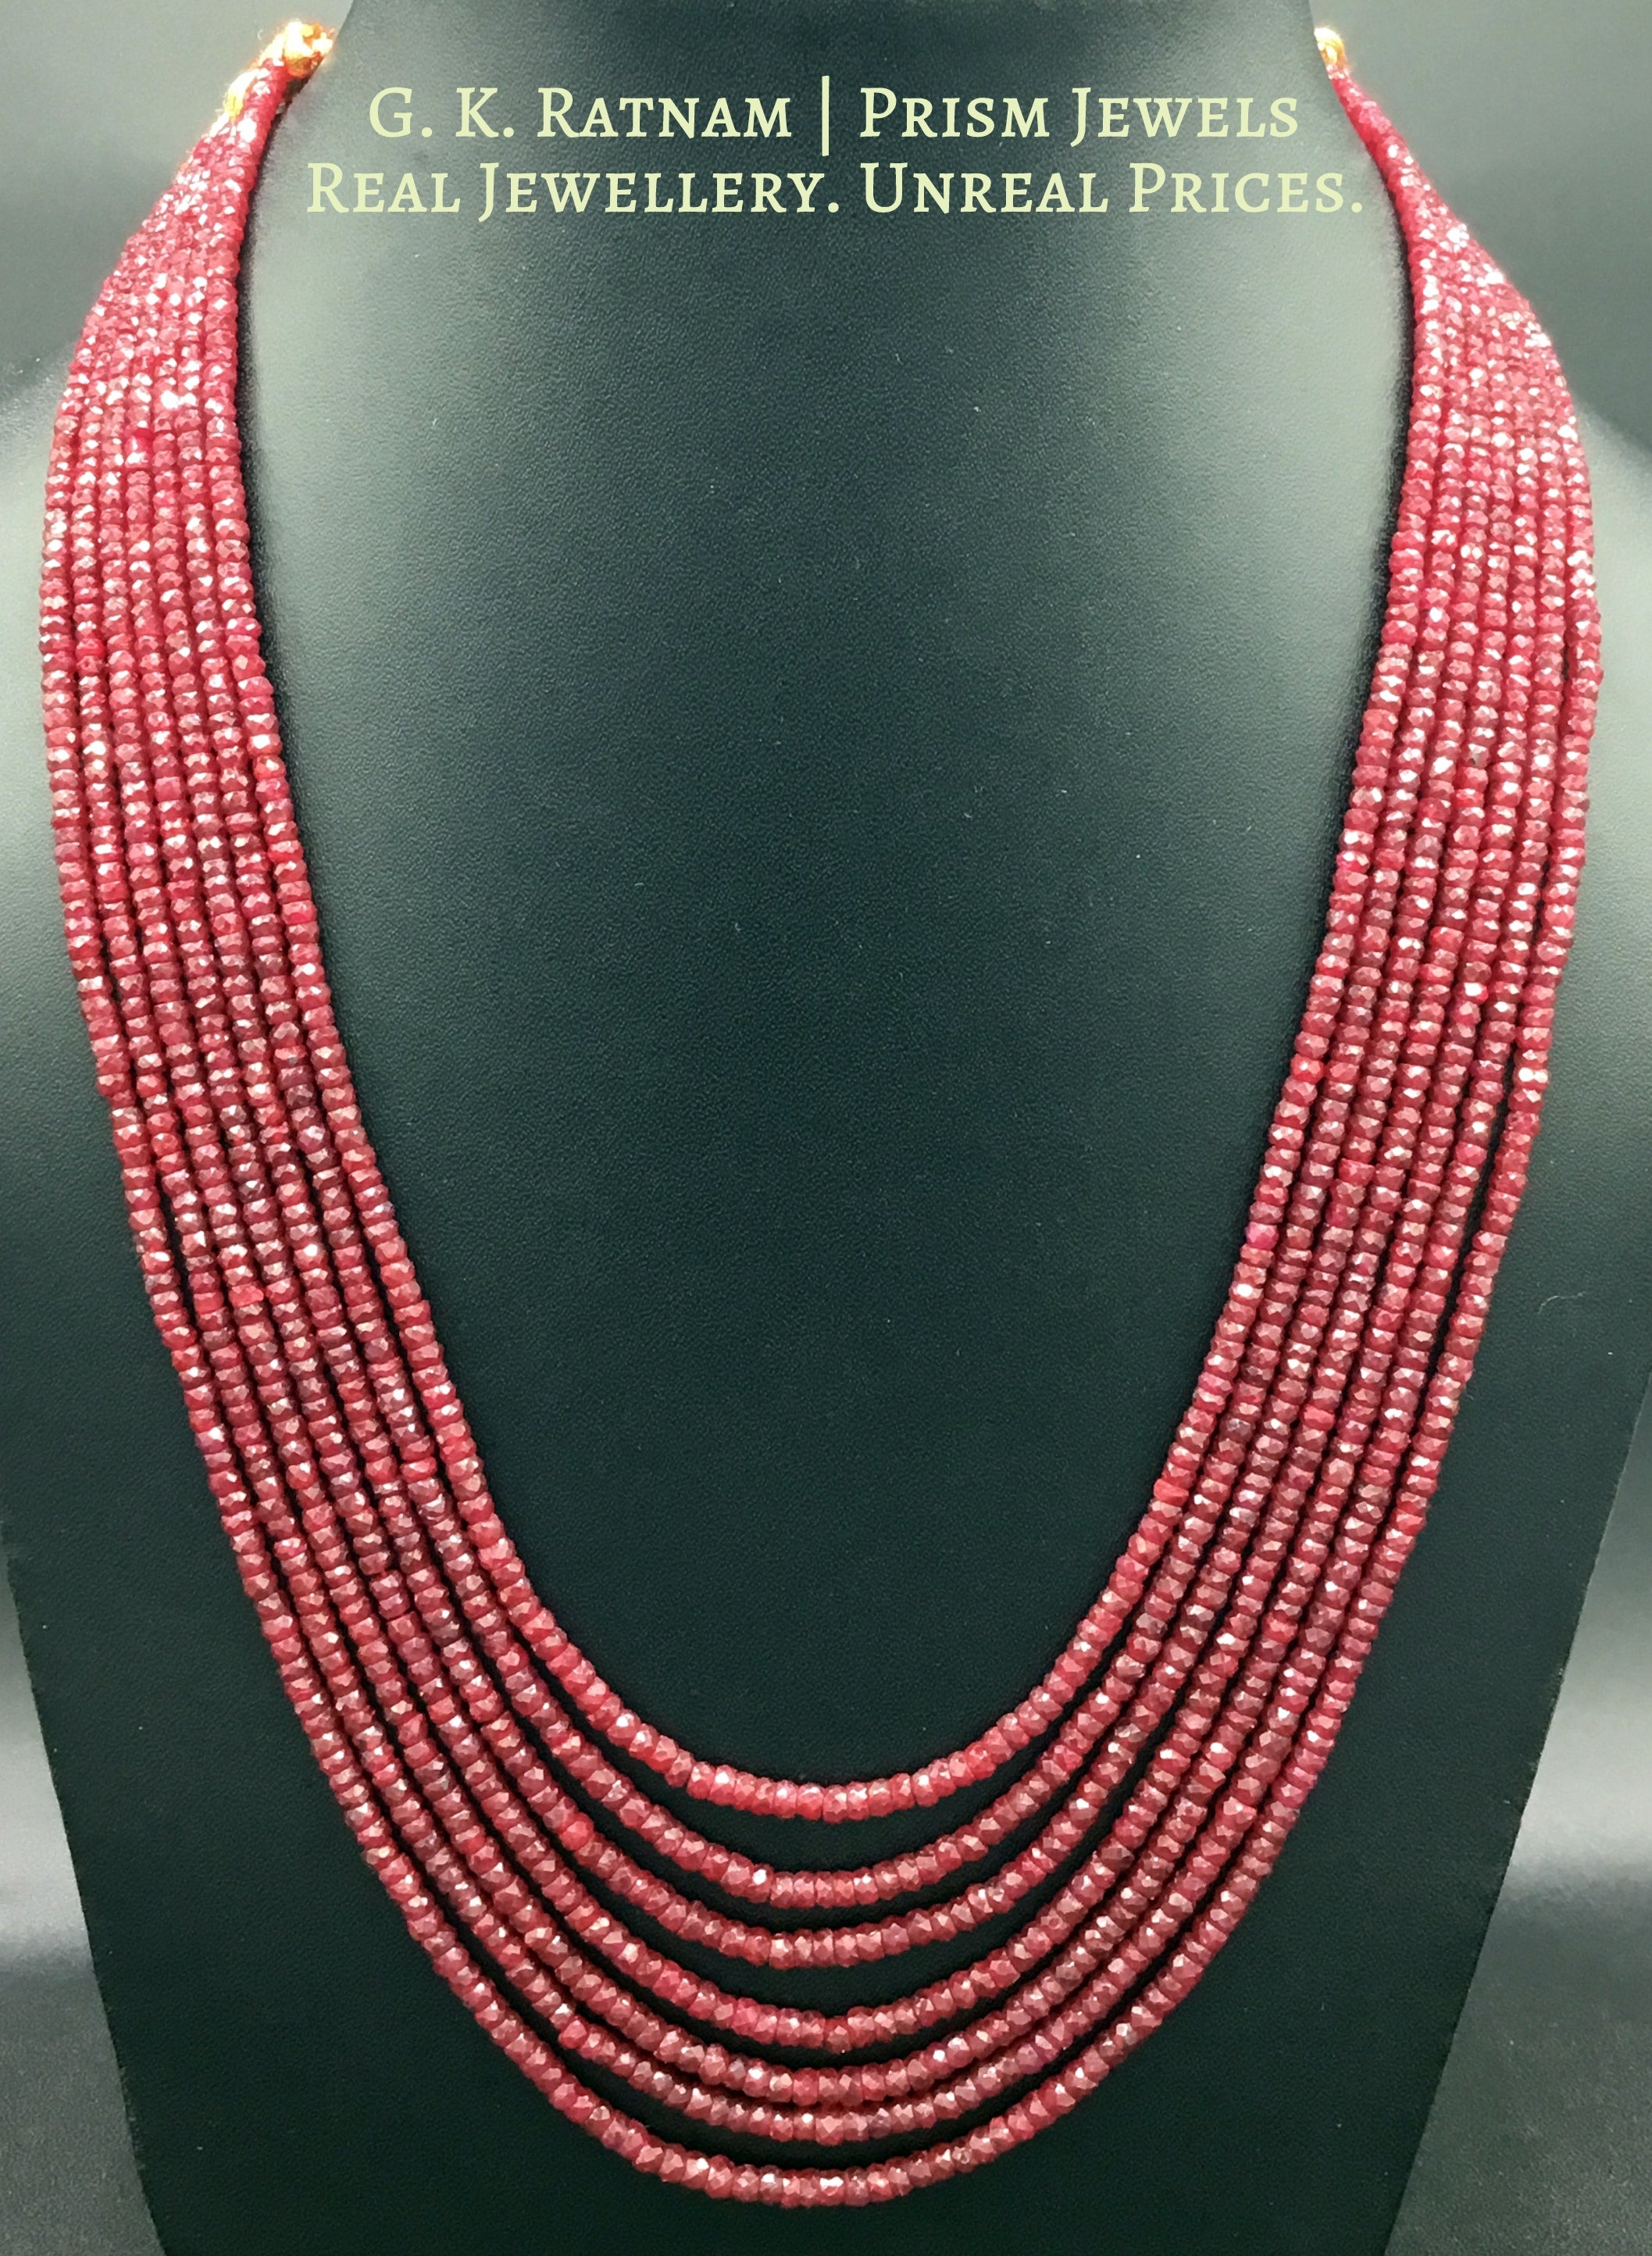 Natural (heat-treated) cut Rubies 7 line Necklace - G. K. Ratnam